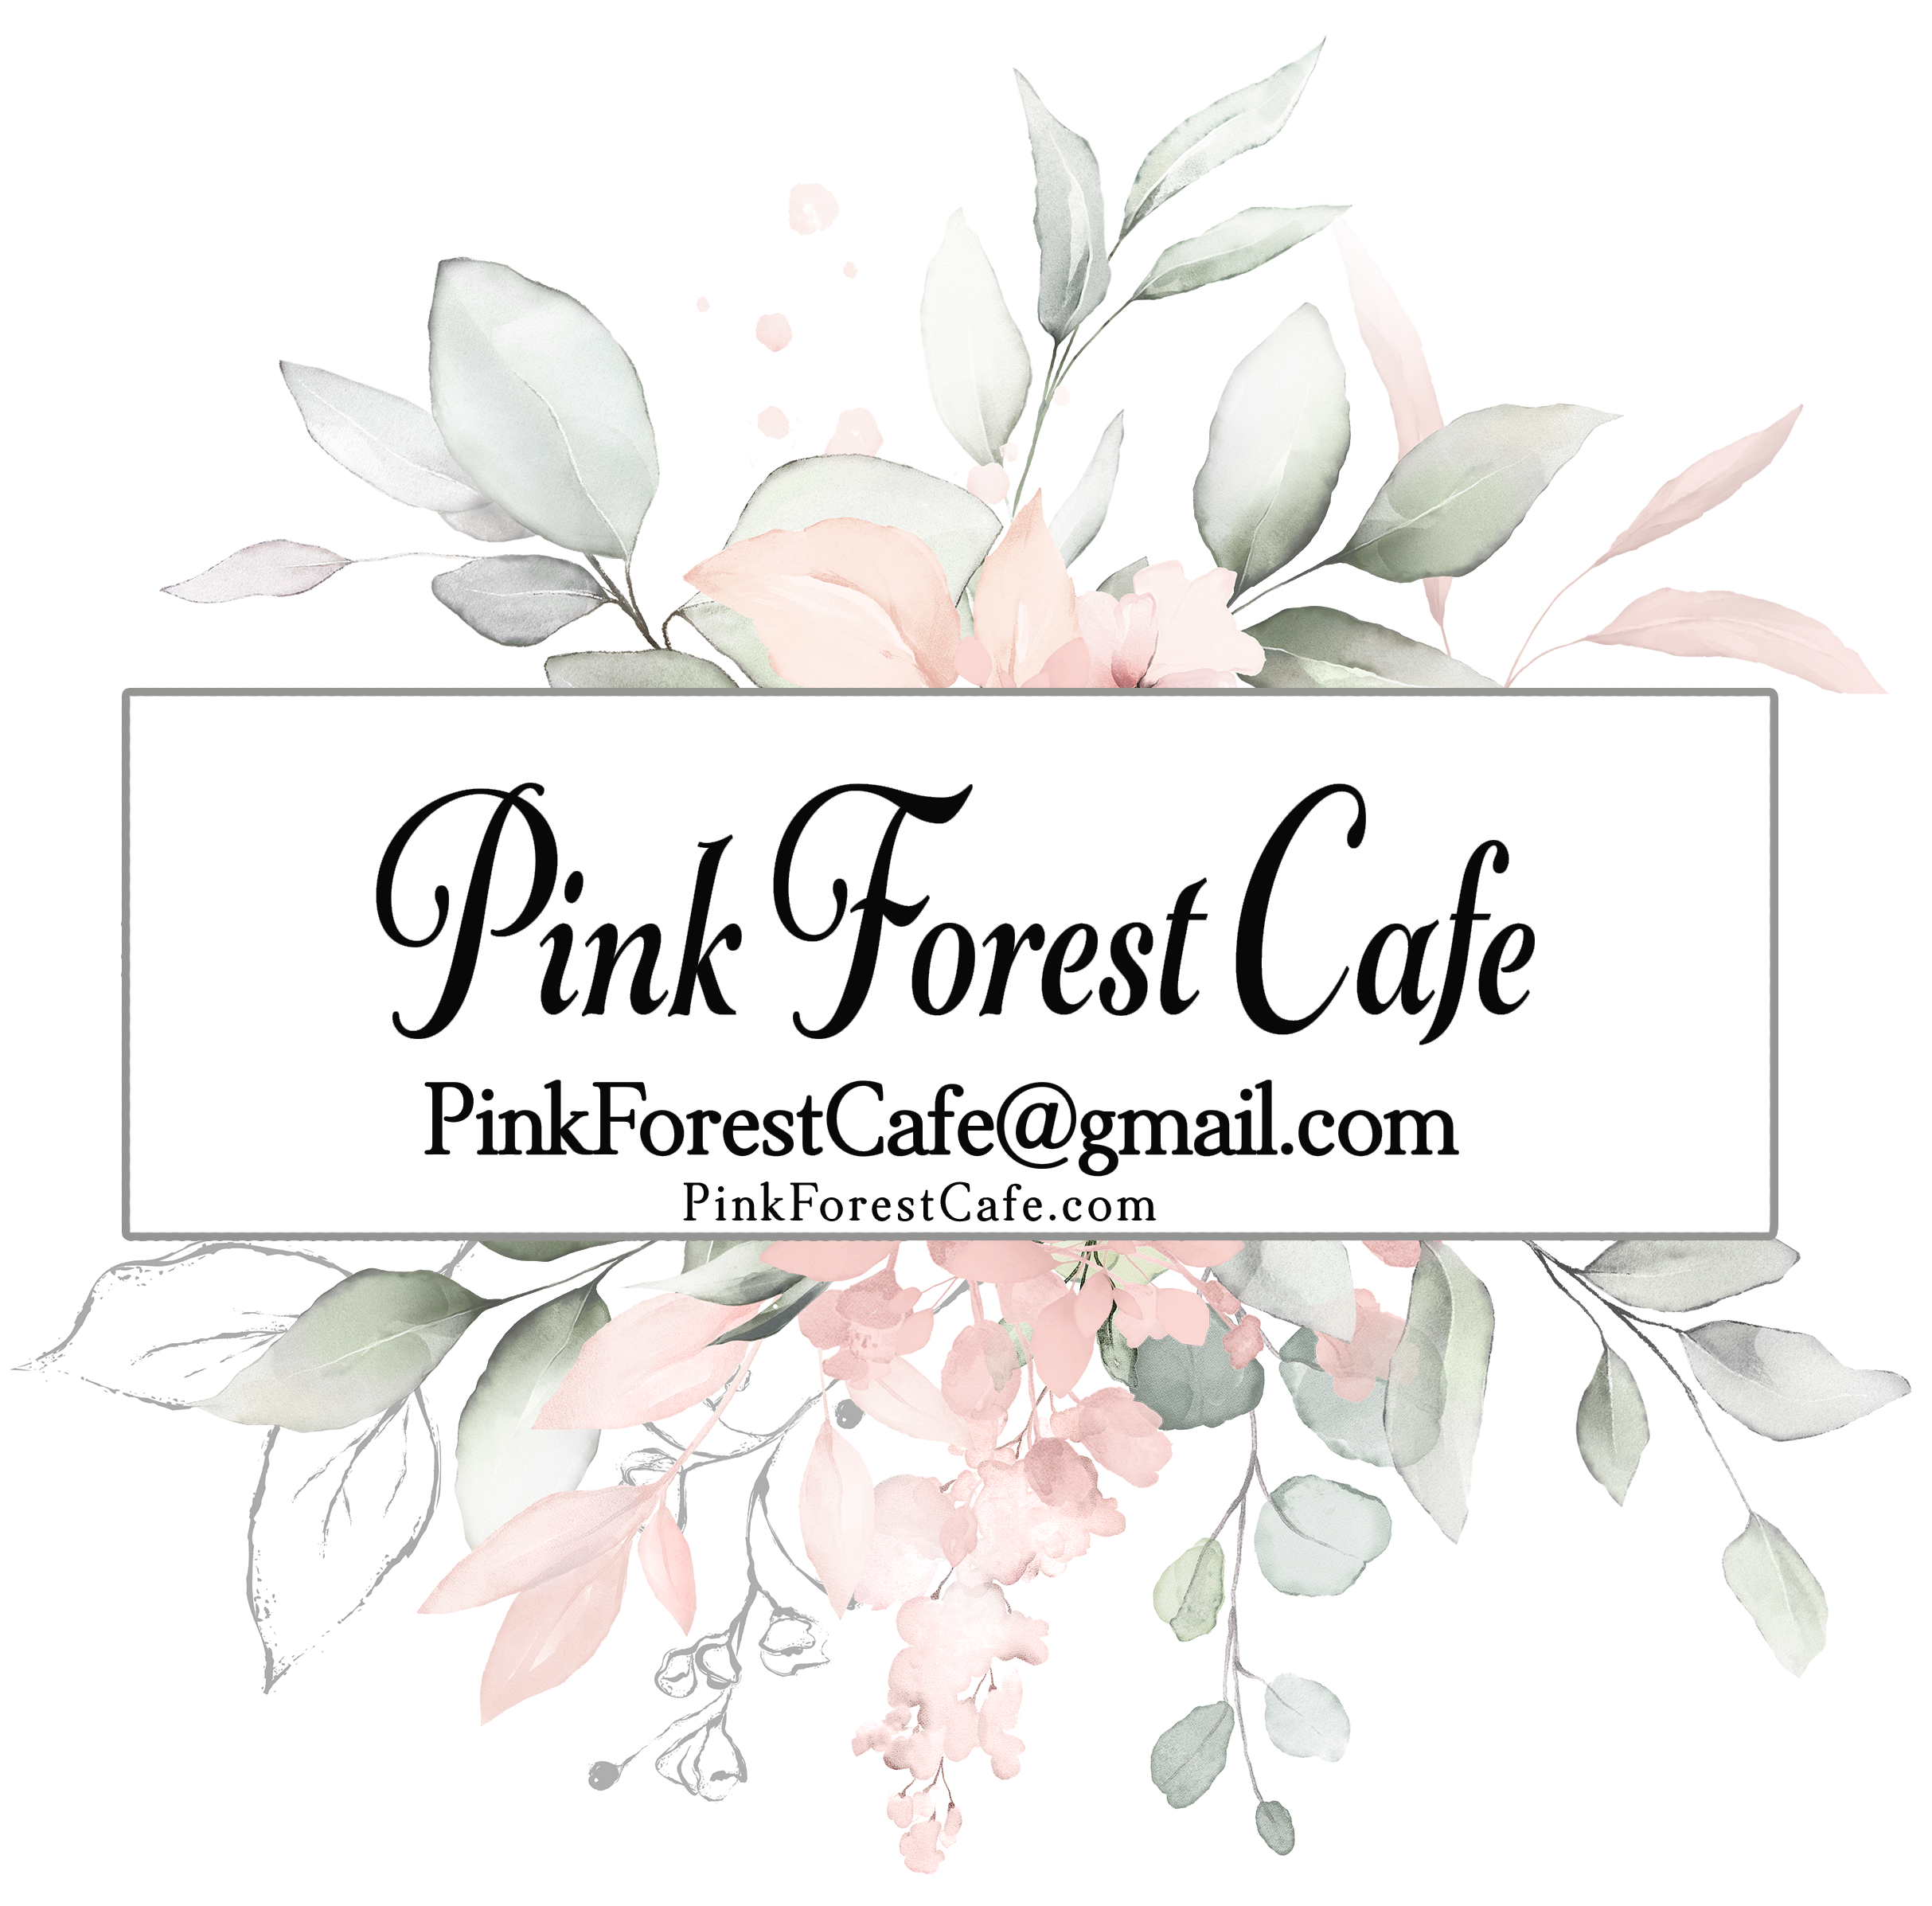 Order My Print - Pink Forest Cafe - 4 (Four) Prints - 4 Designs Printed and Shipped